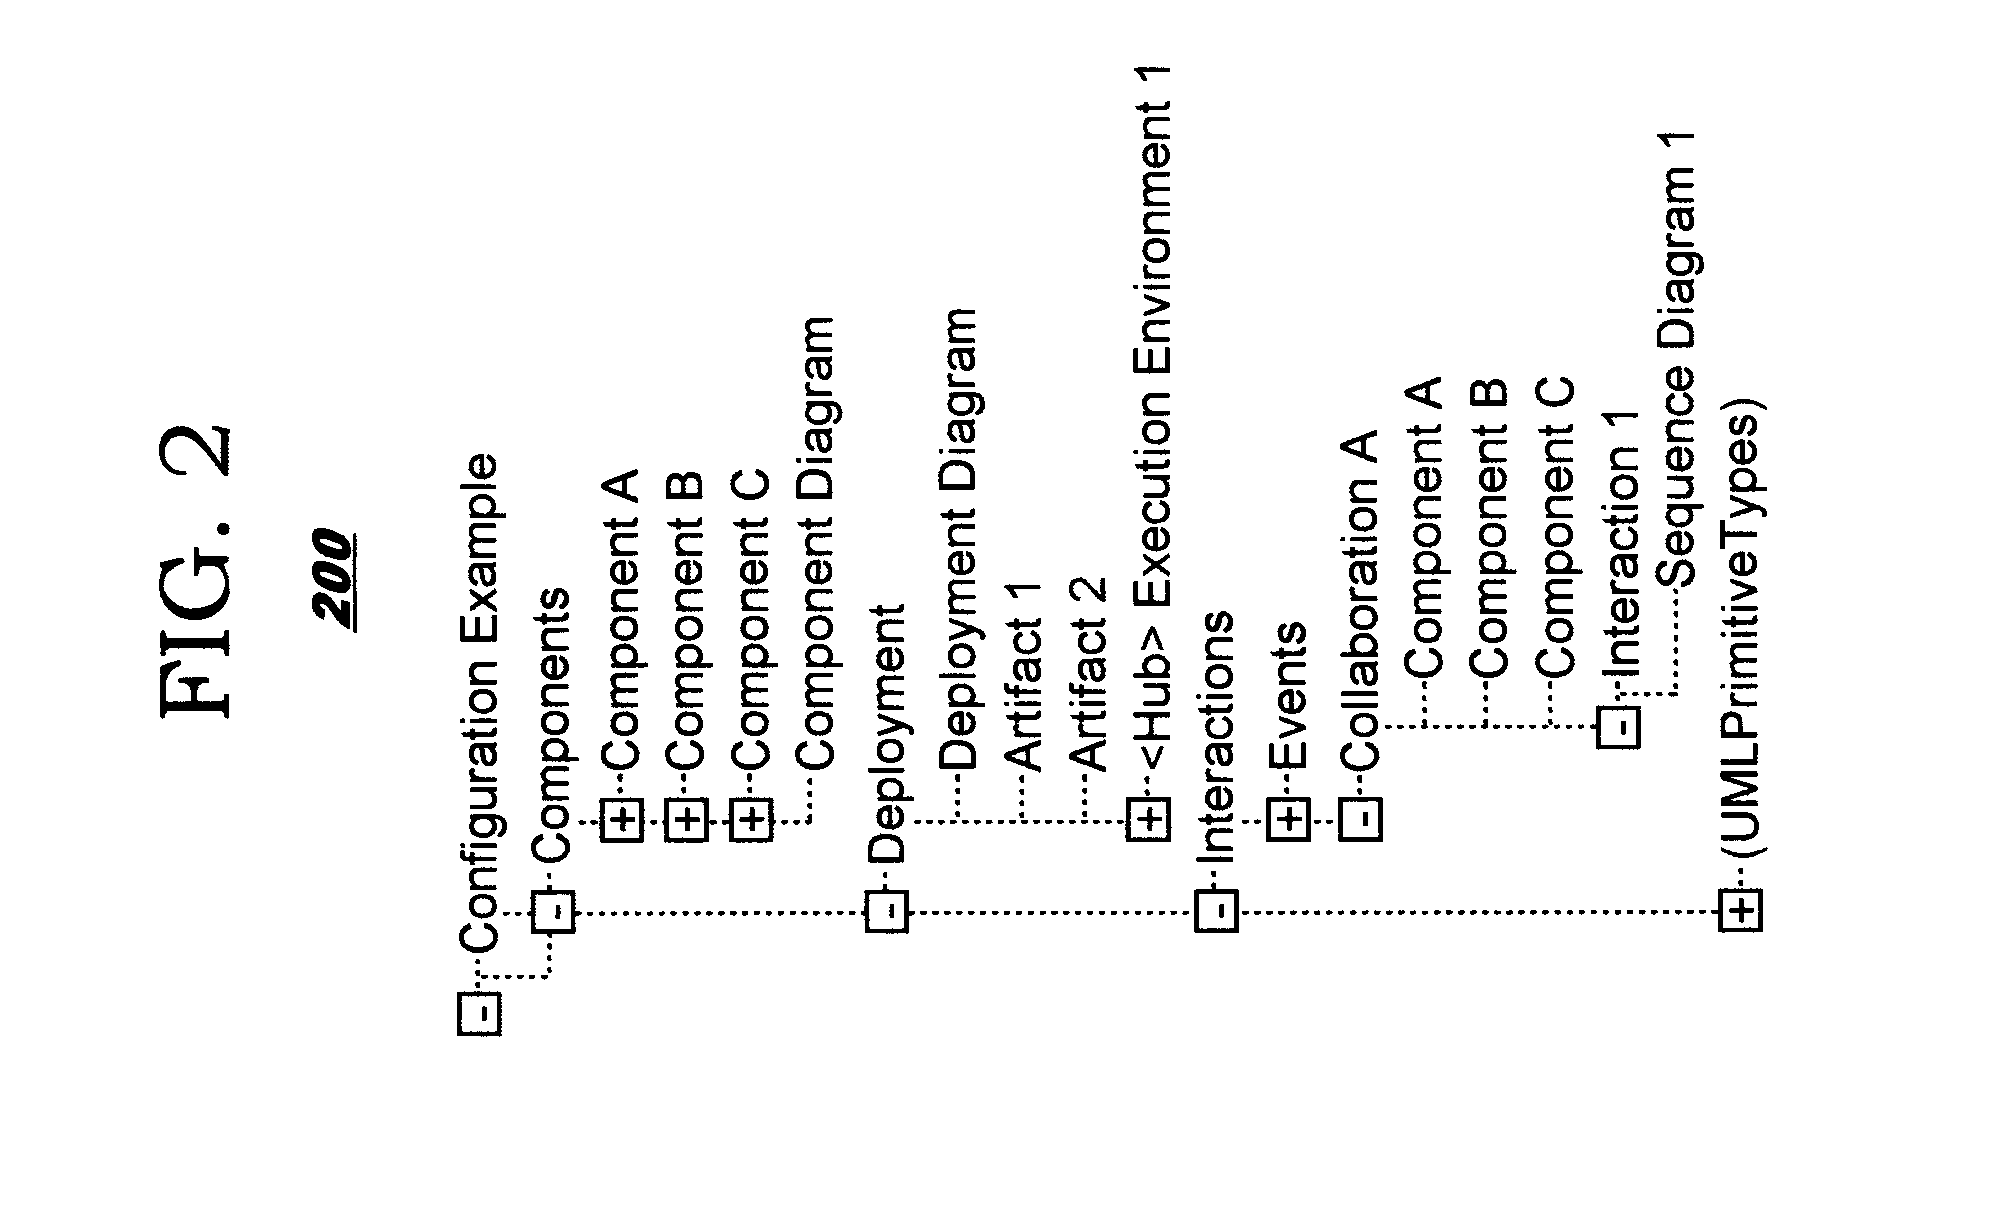 Configuring Assembly of a System using Supplied Architectural Artifacts